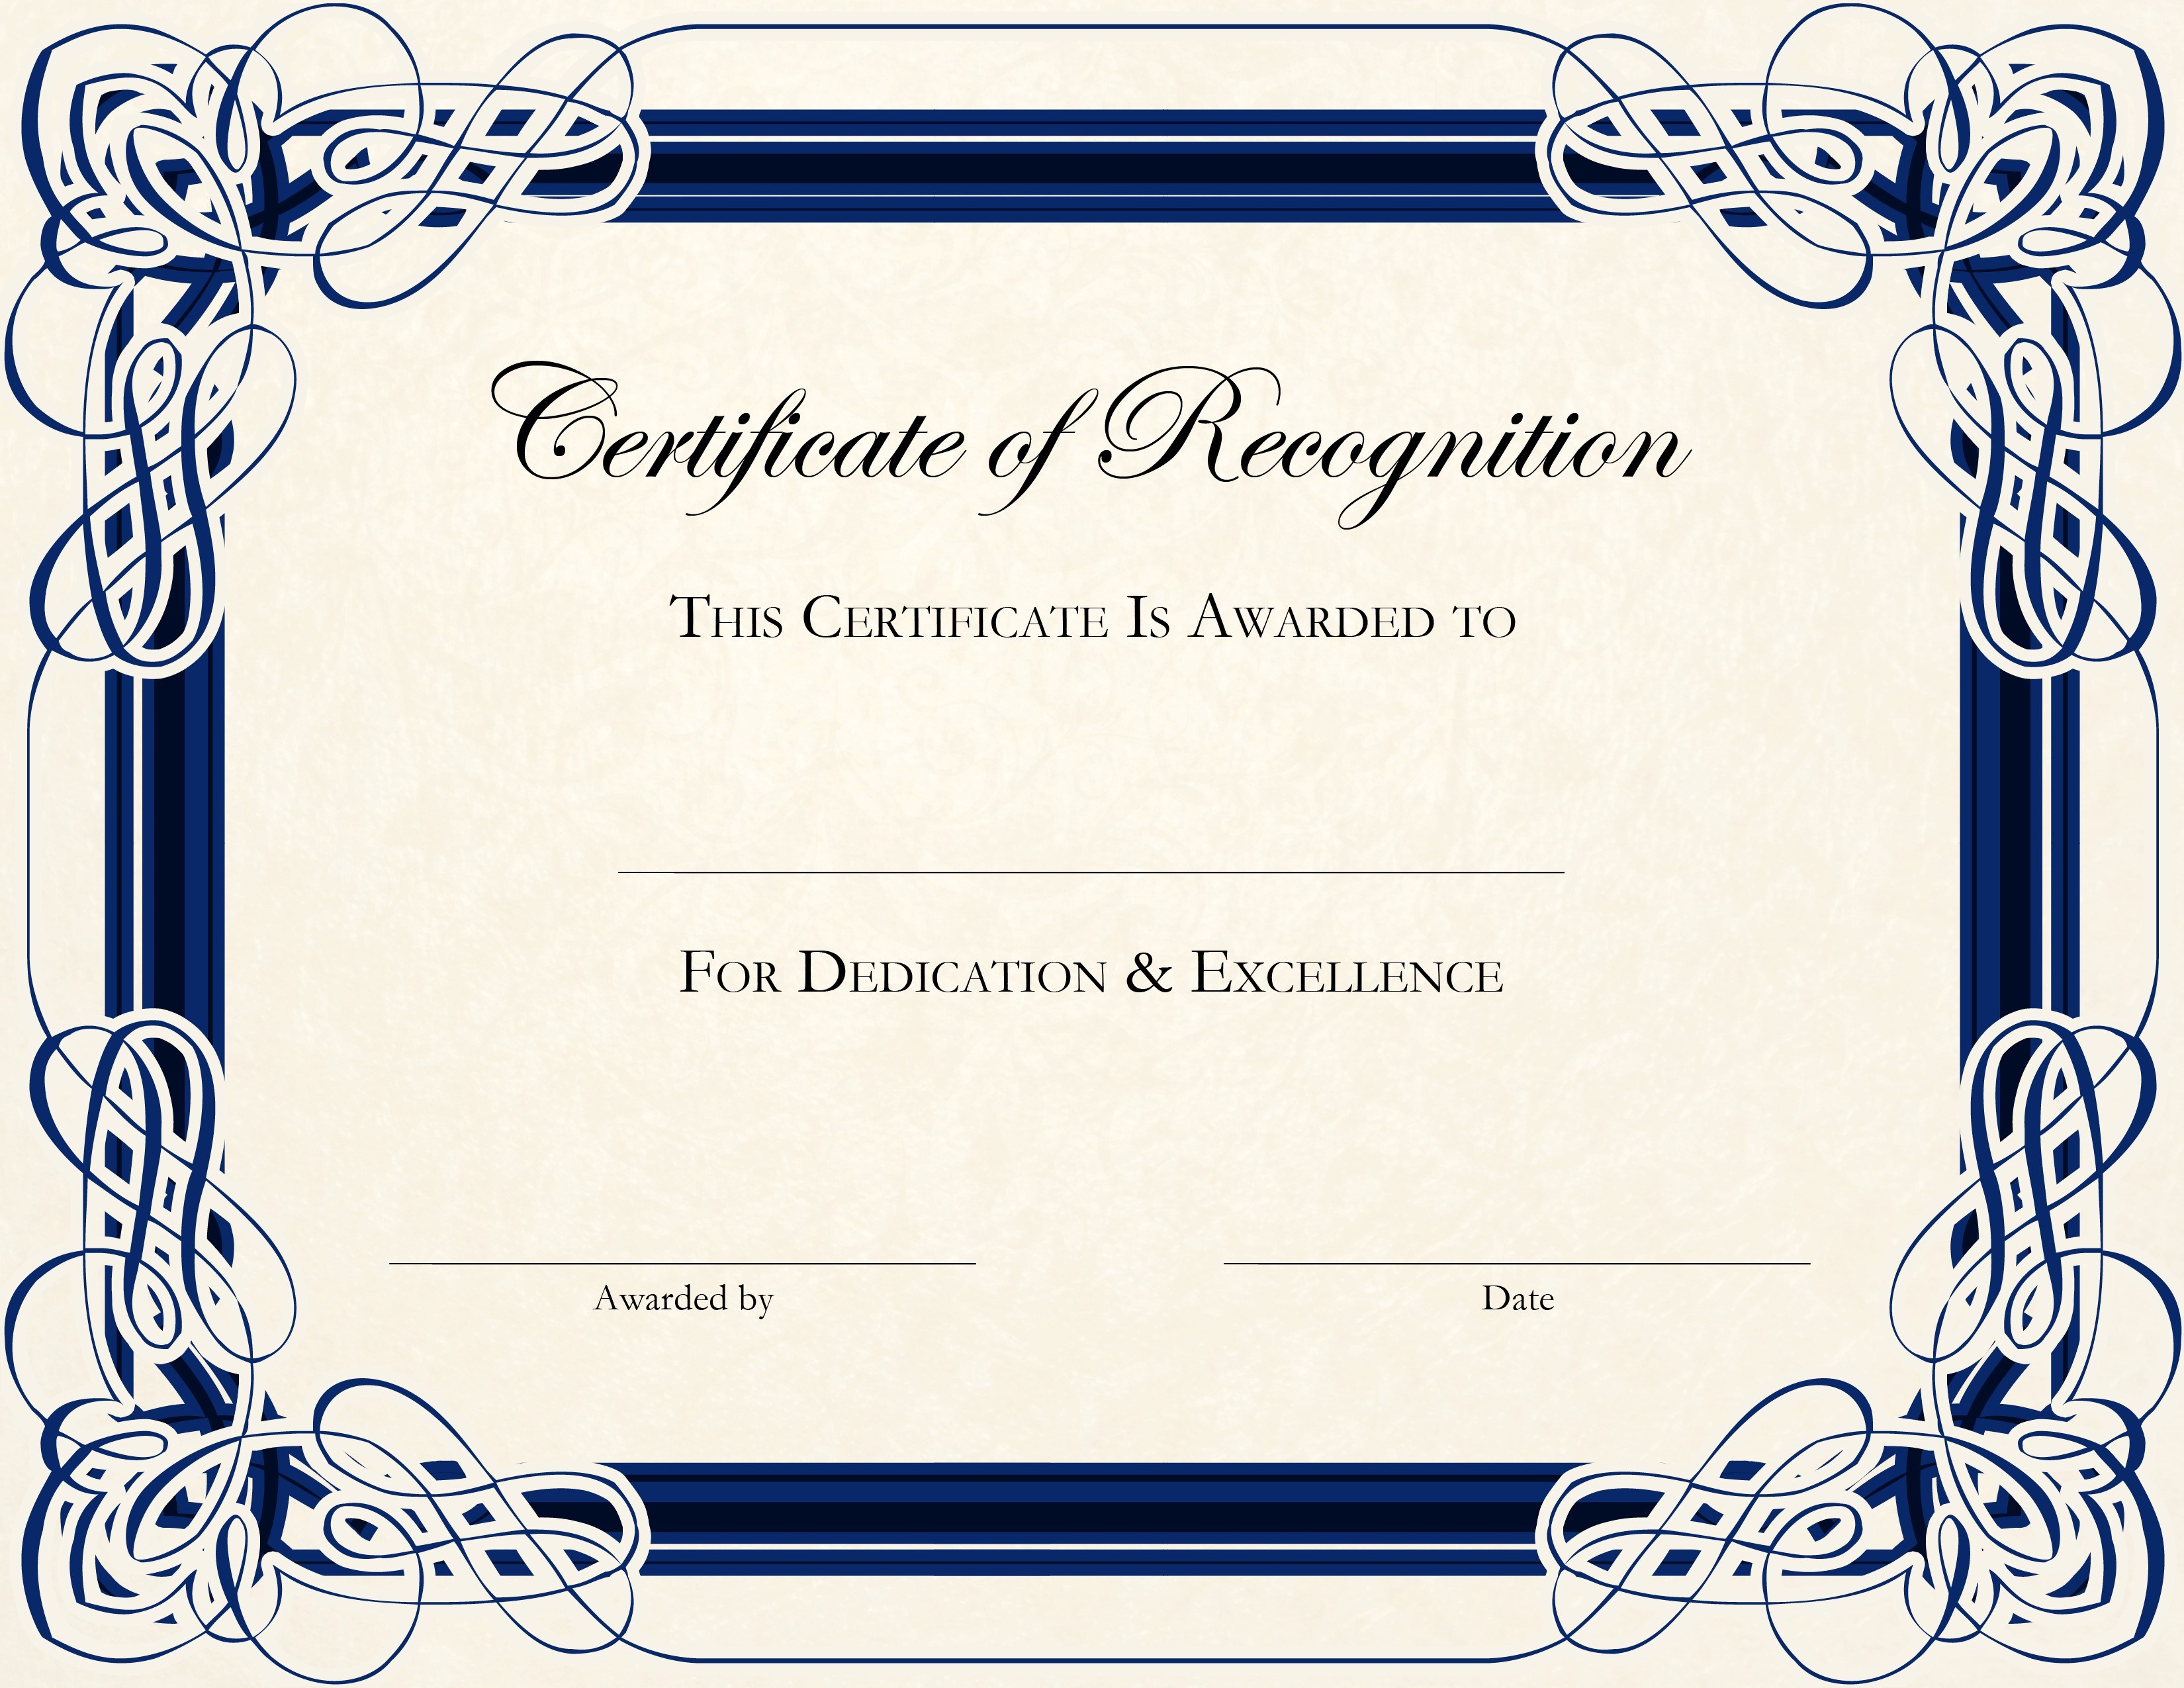 Printable Certificate Template  room surf.com Intended For Free Printable Certificate Of Achievement Template